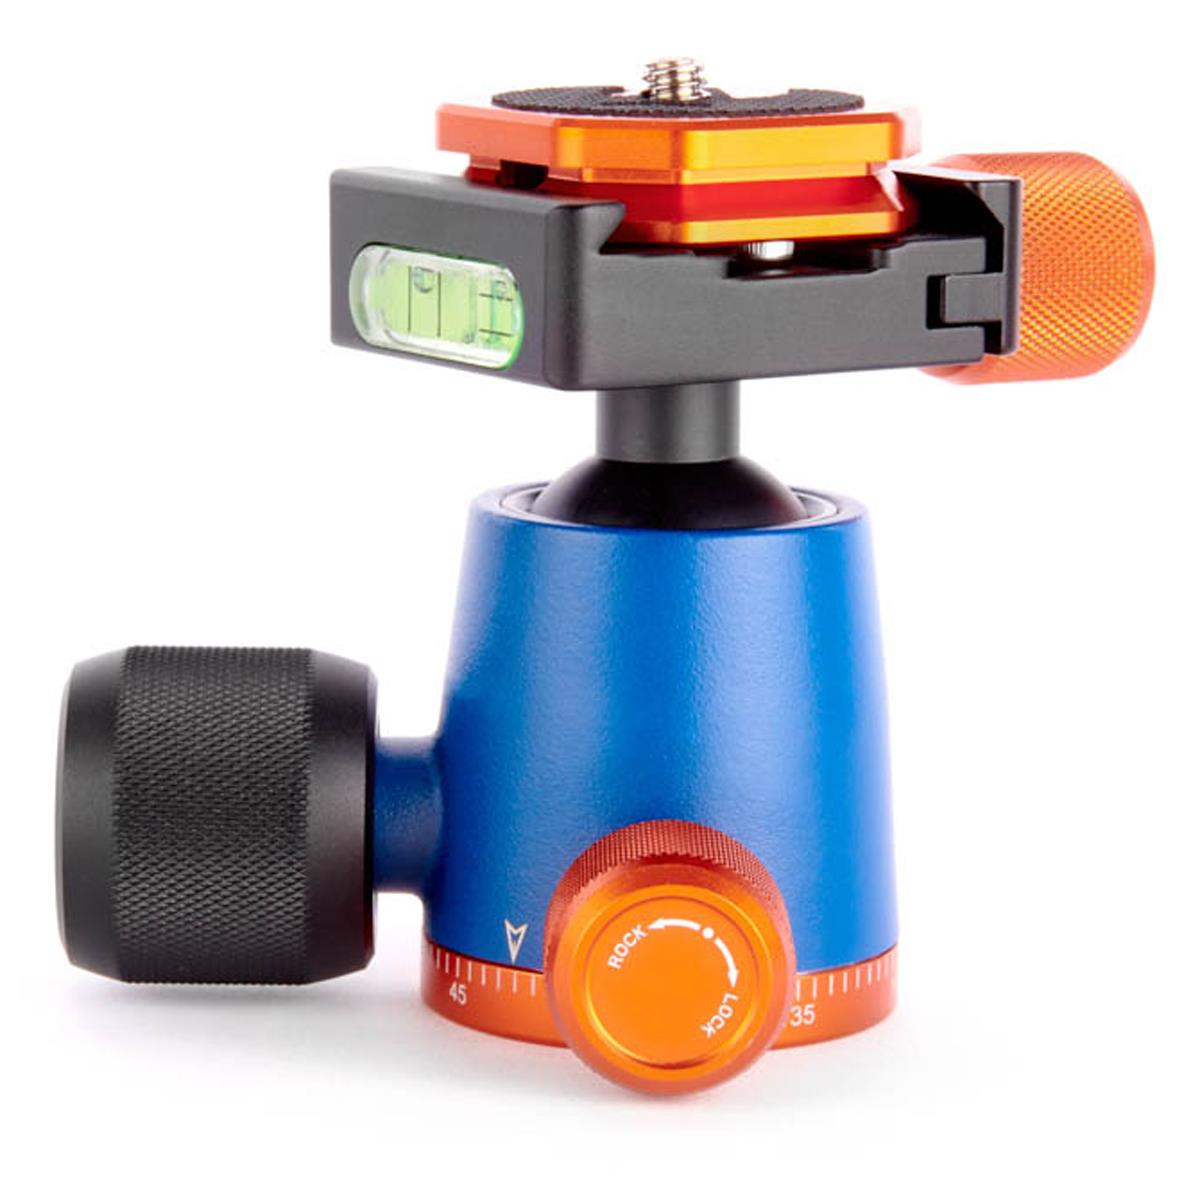 Image of 3 Legged Thing AirHed Neo 2.0 Multi-Functional Ball-Head